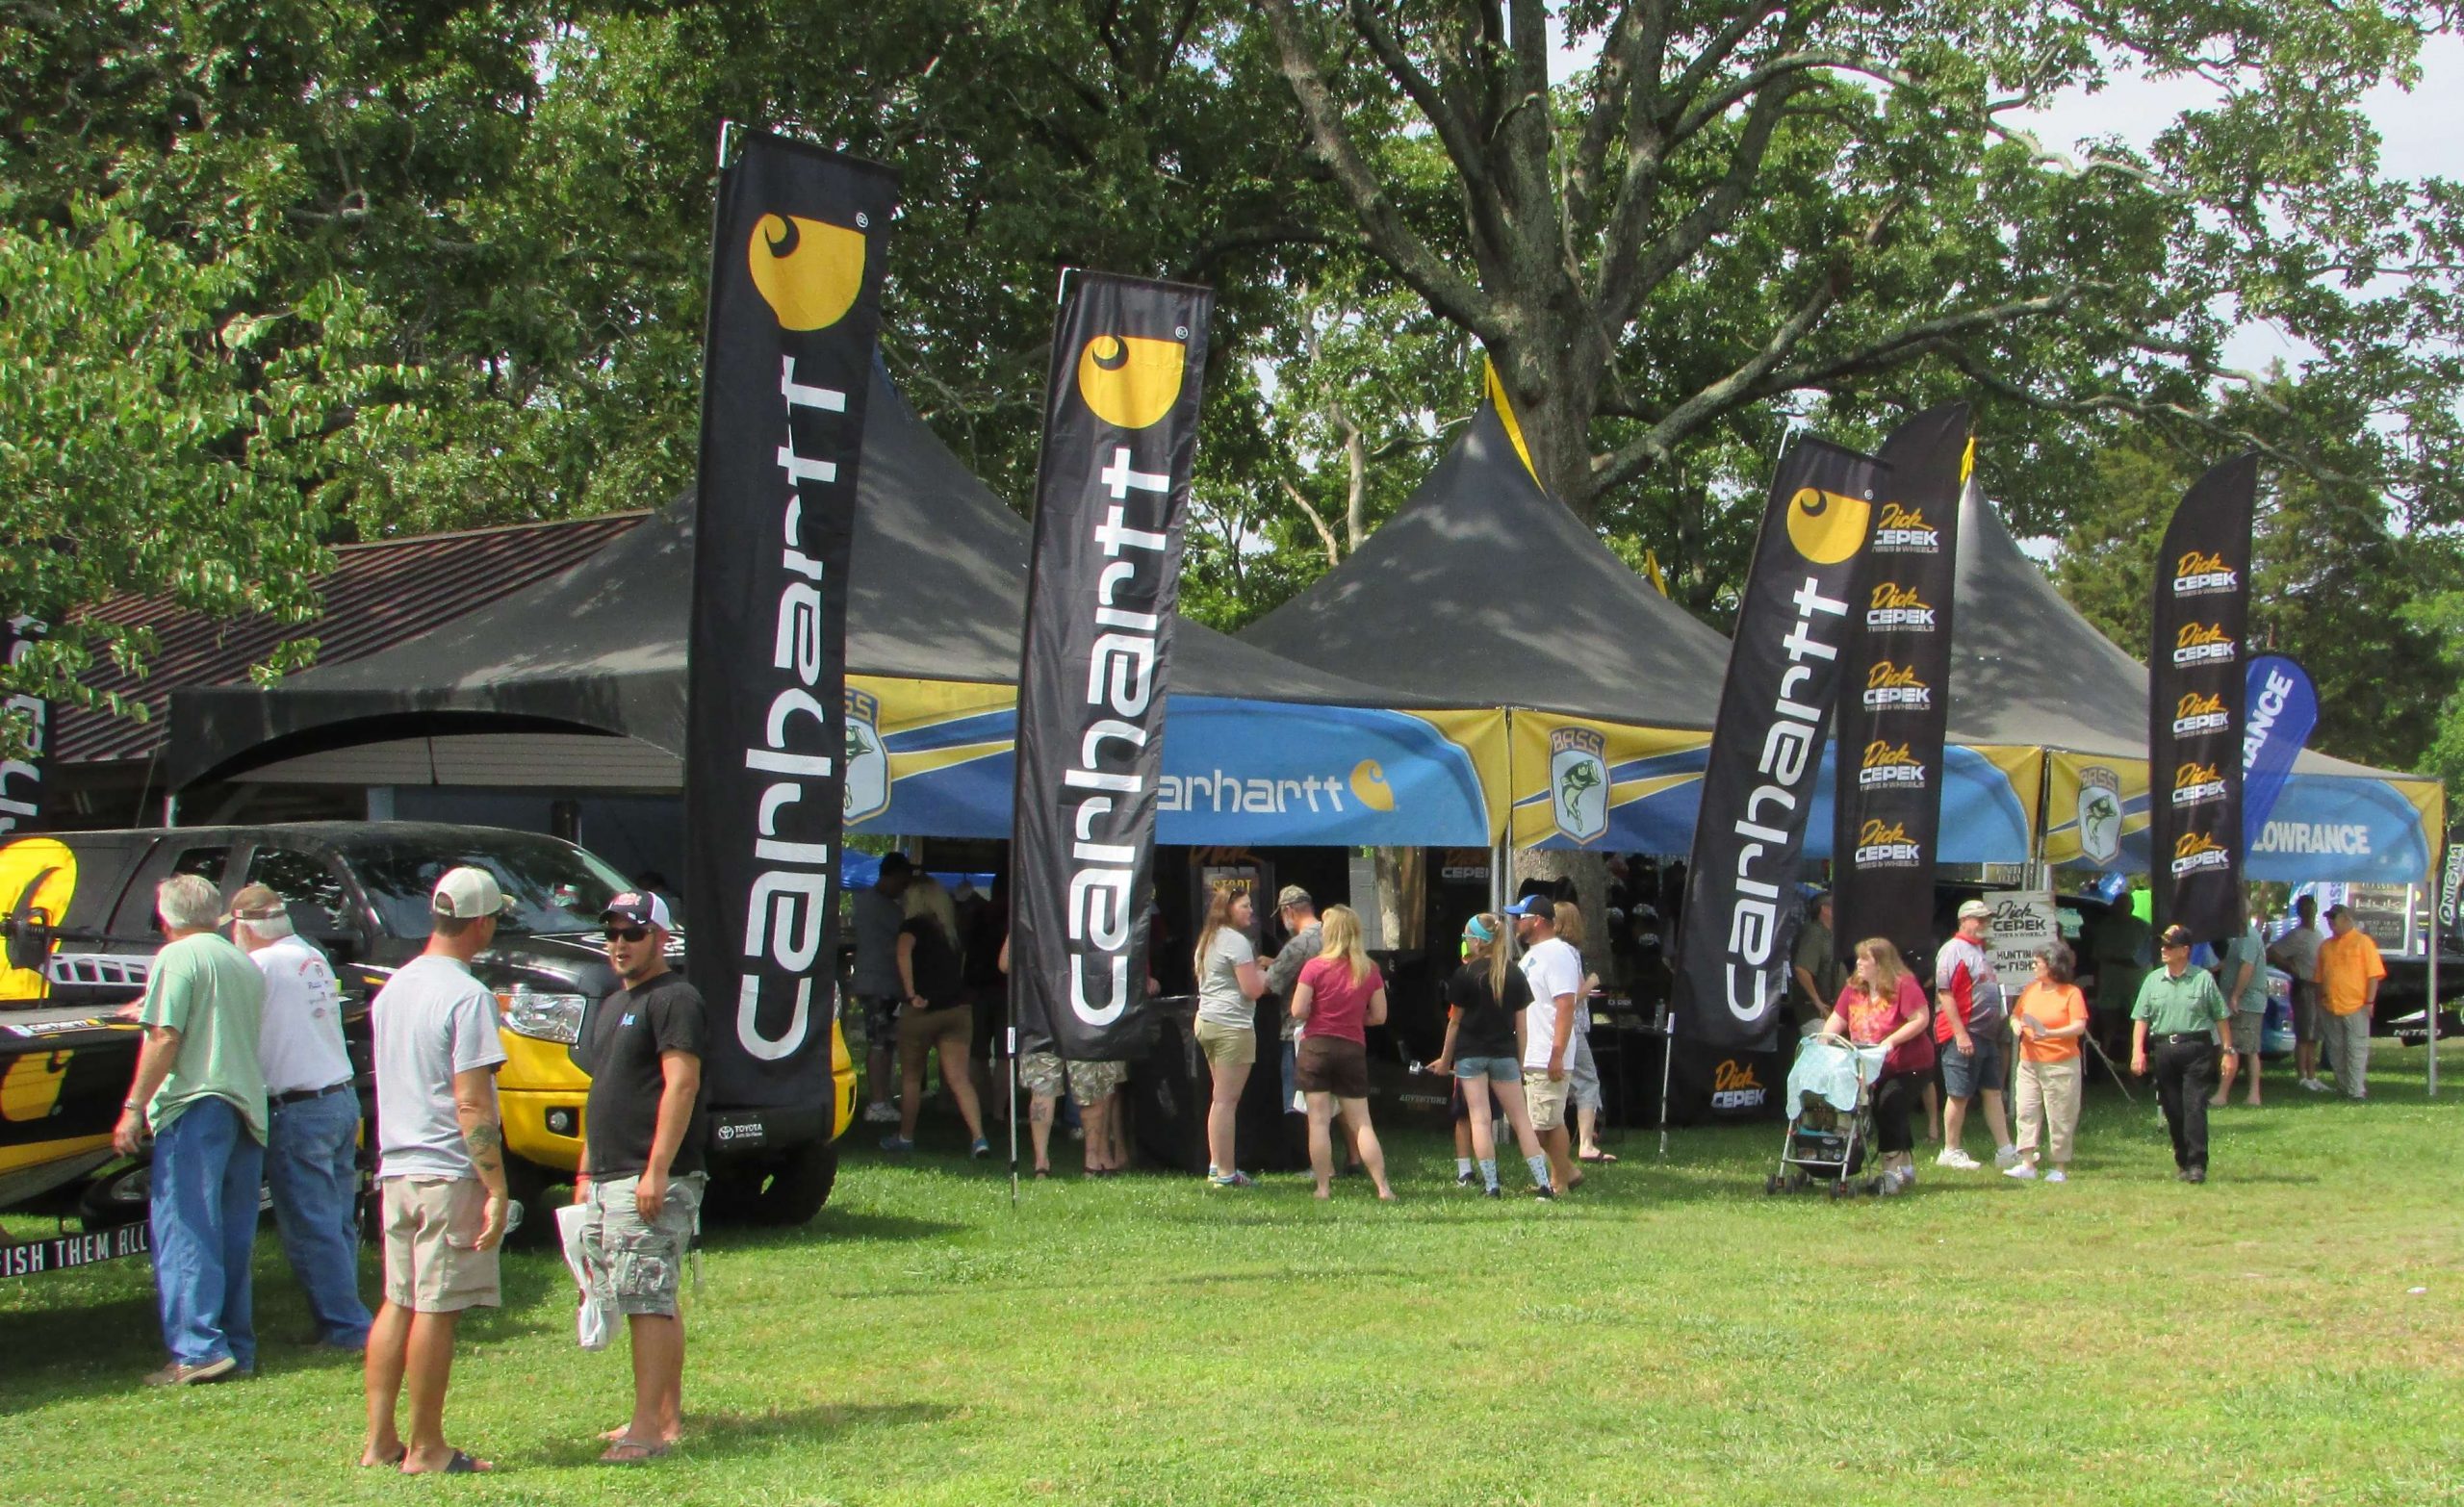 Many tents offered signups for mailing lists and giveaways.